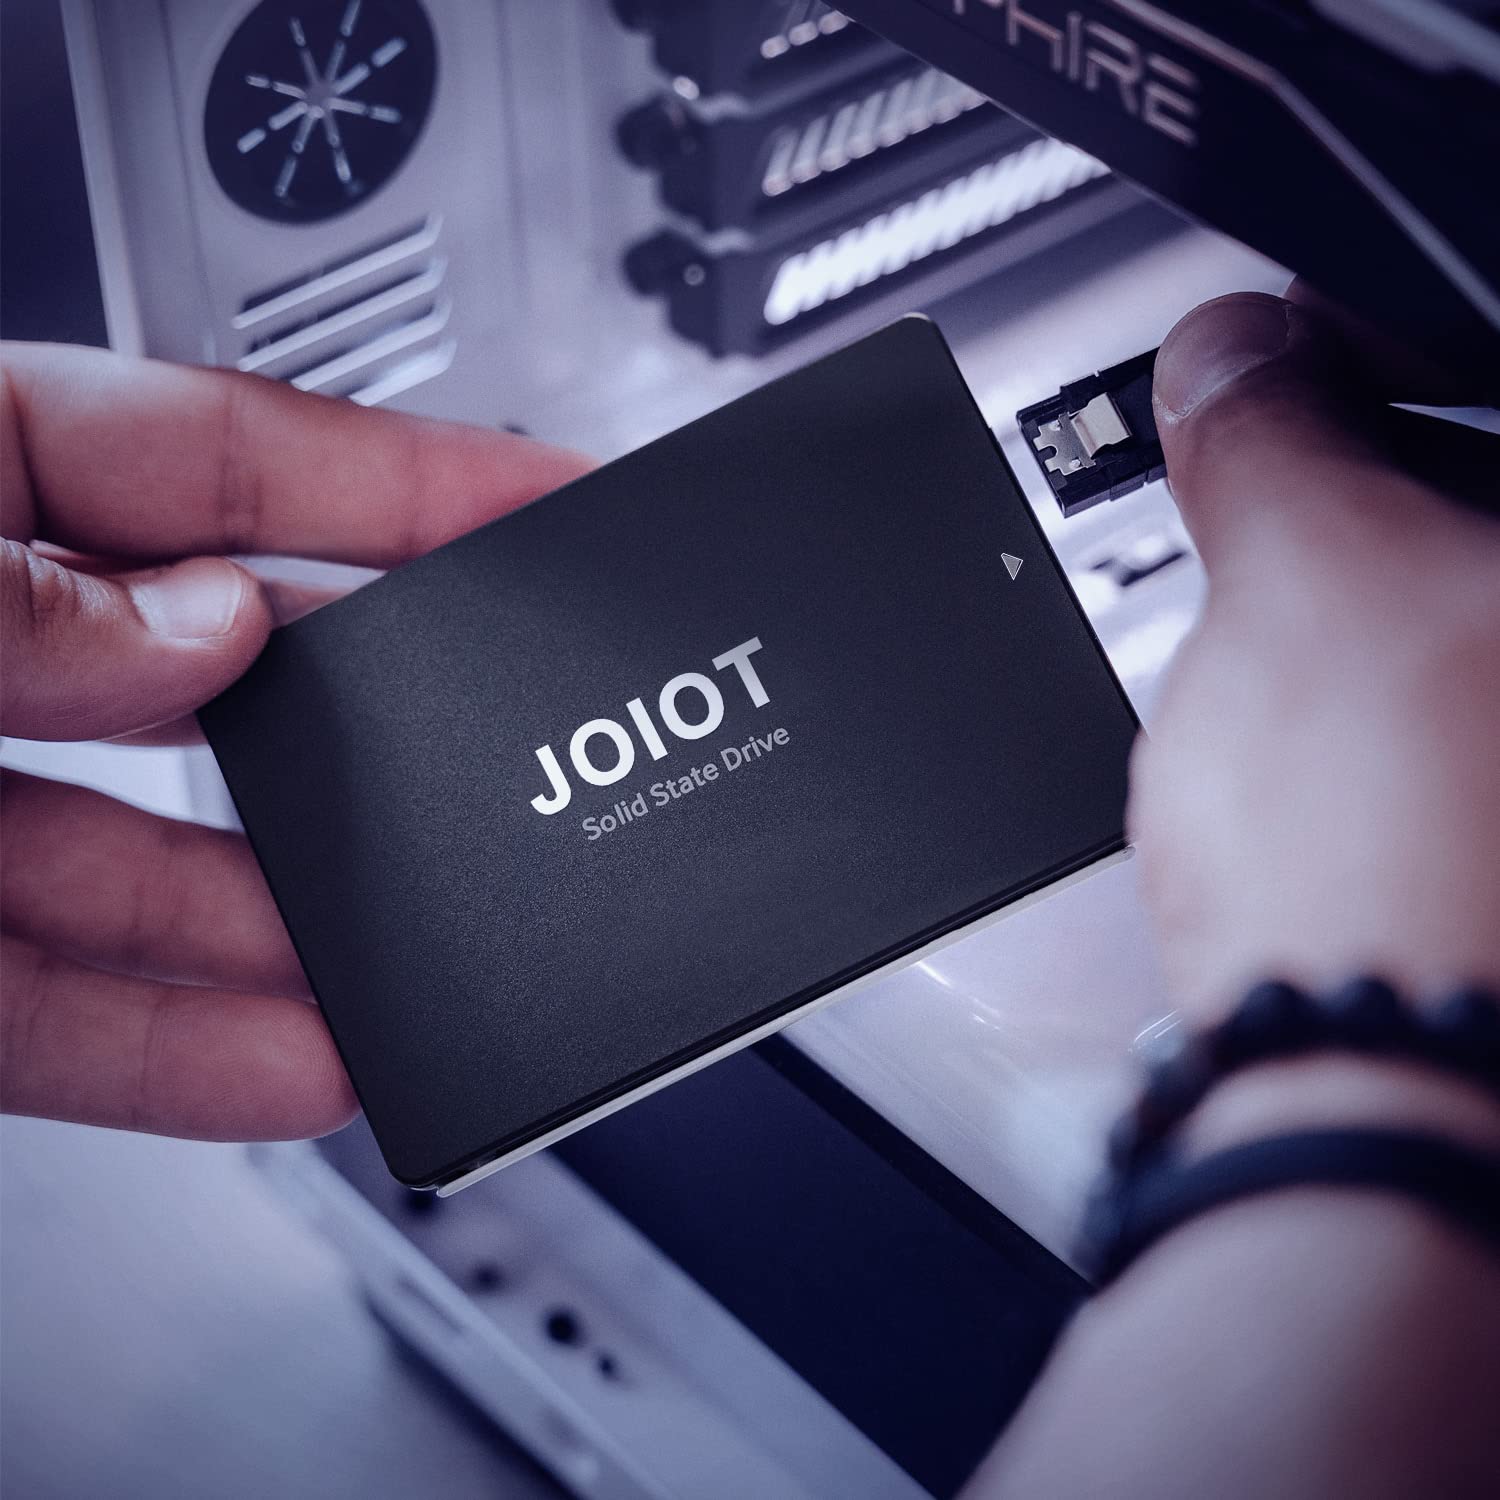 JOIOT 128GB SSD Internal Solid State Hard Drive, 3D NAND 2.5inch SATA III Internal SSD, Up to 450MB/s, Upgraded Performance for PC Laptop Game Creation